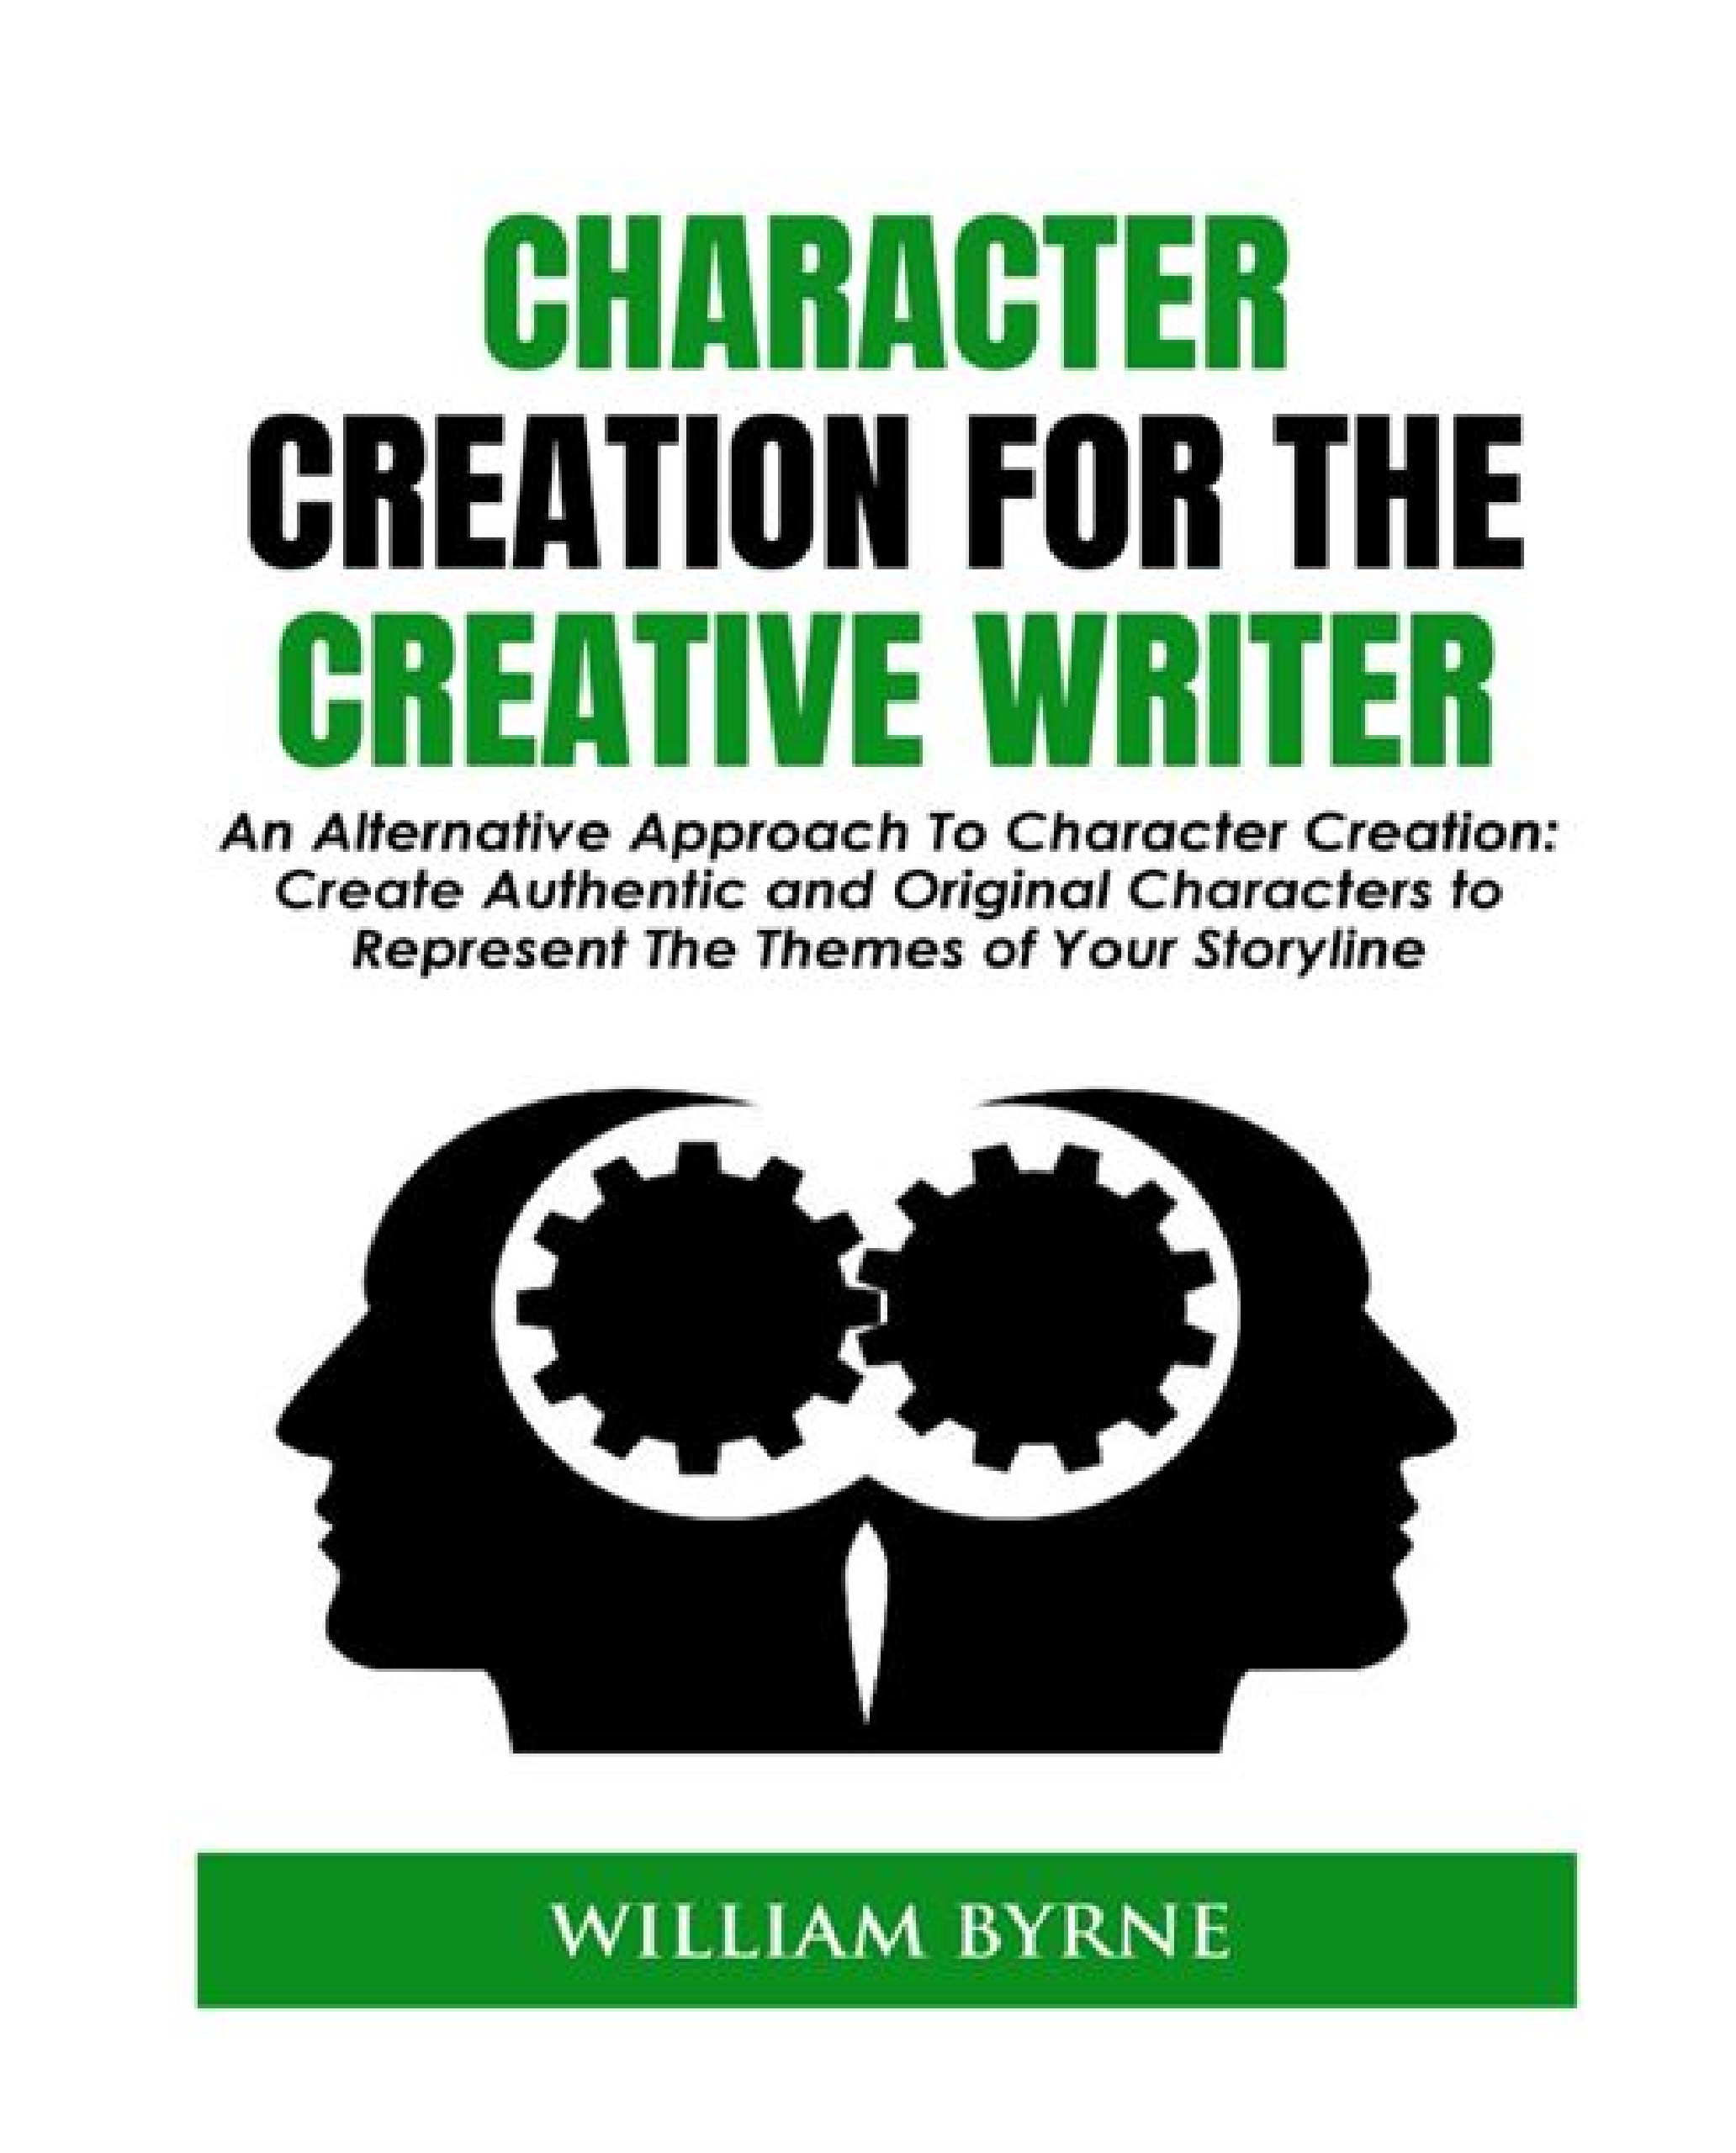 FREE: Character Creation For The Creative Writer by William Byrne